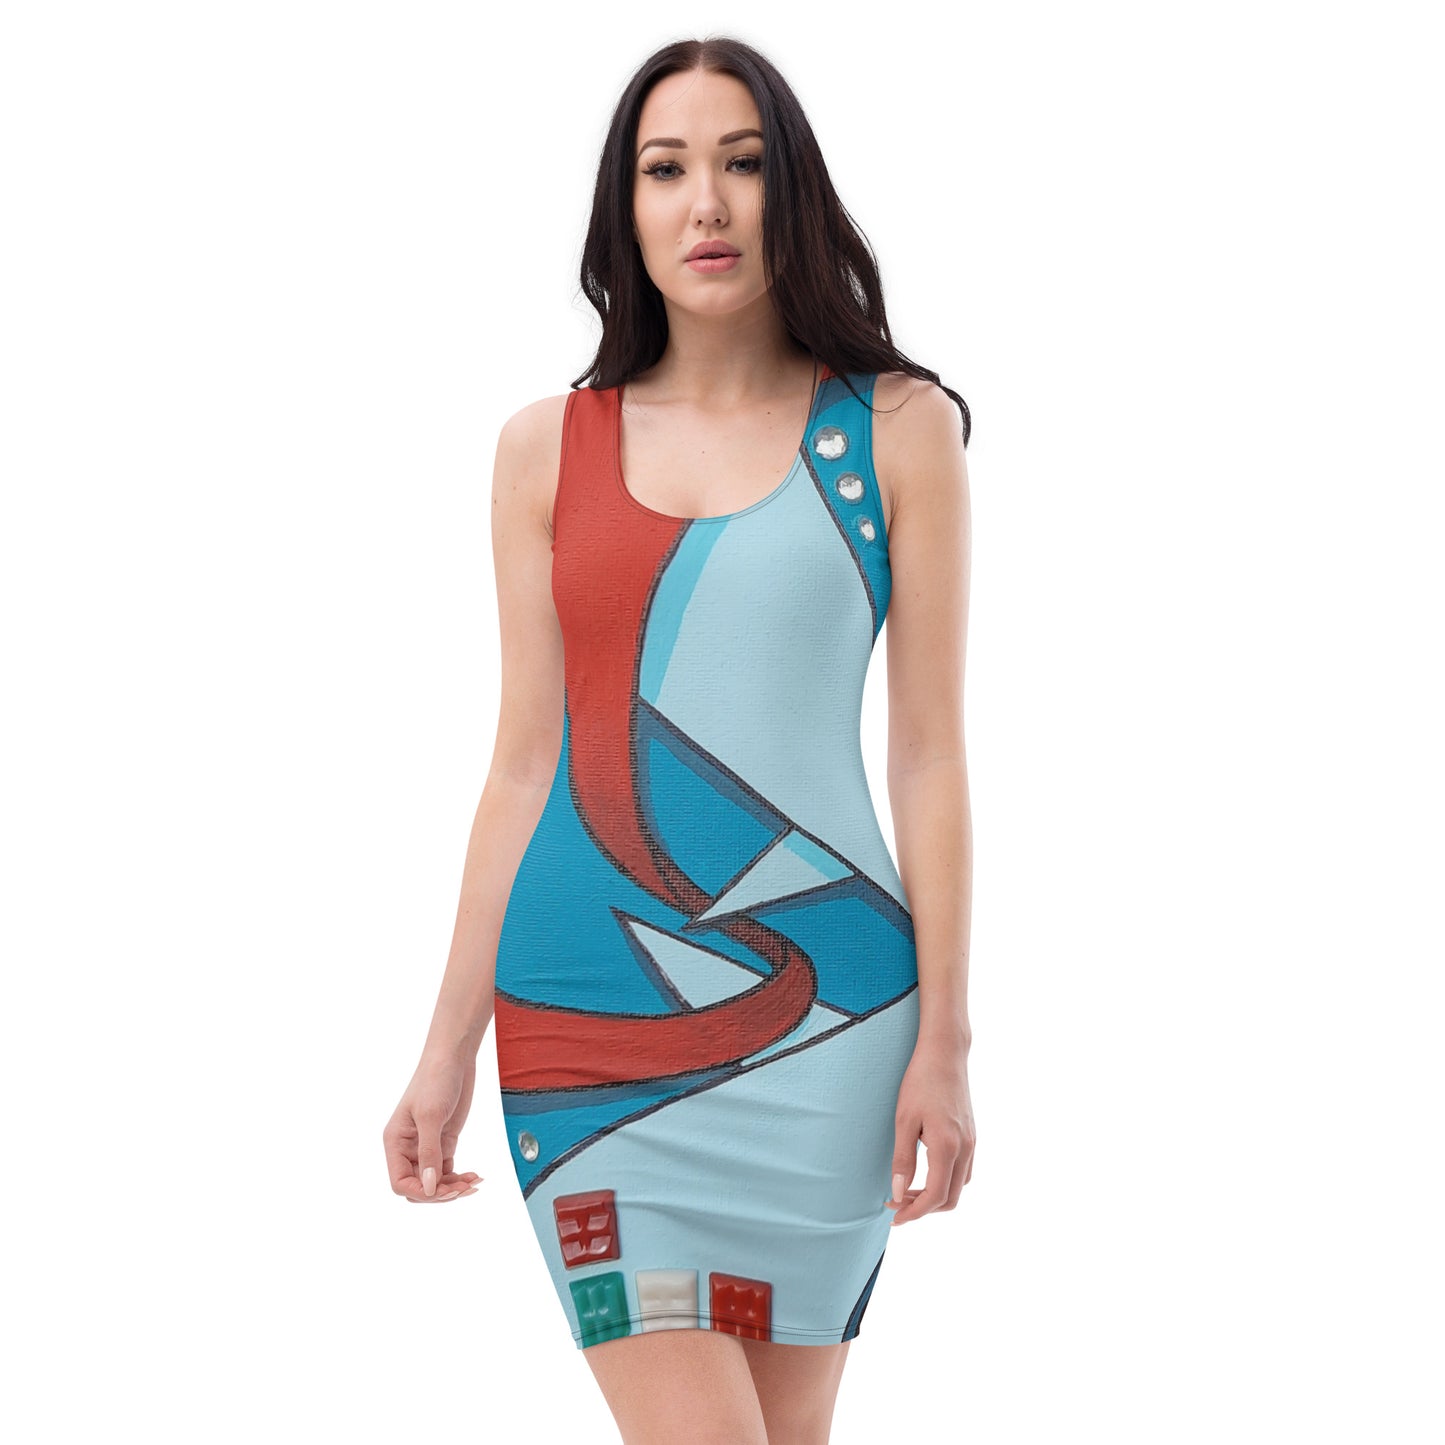 "Conflicting Dimensions" Fitted Dress